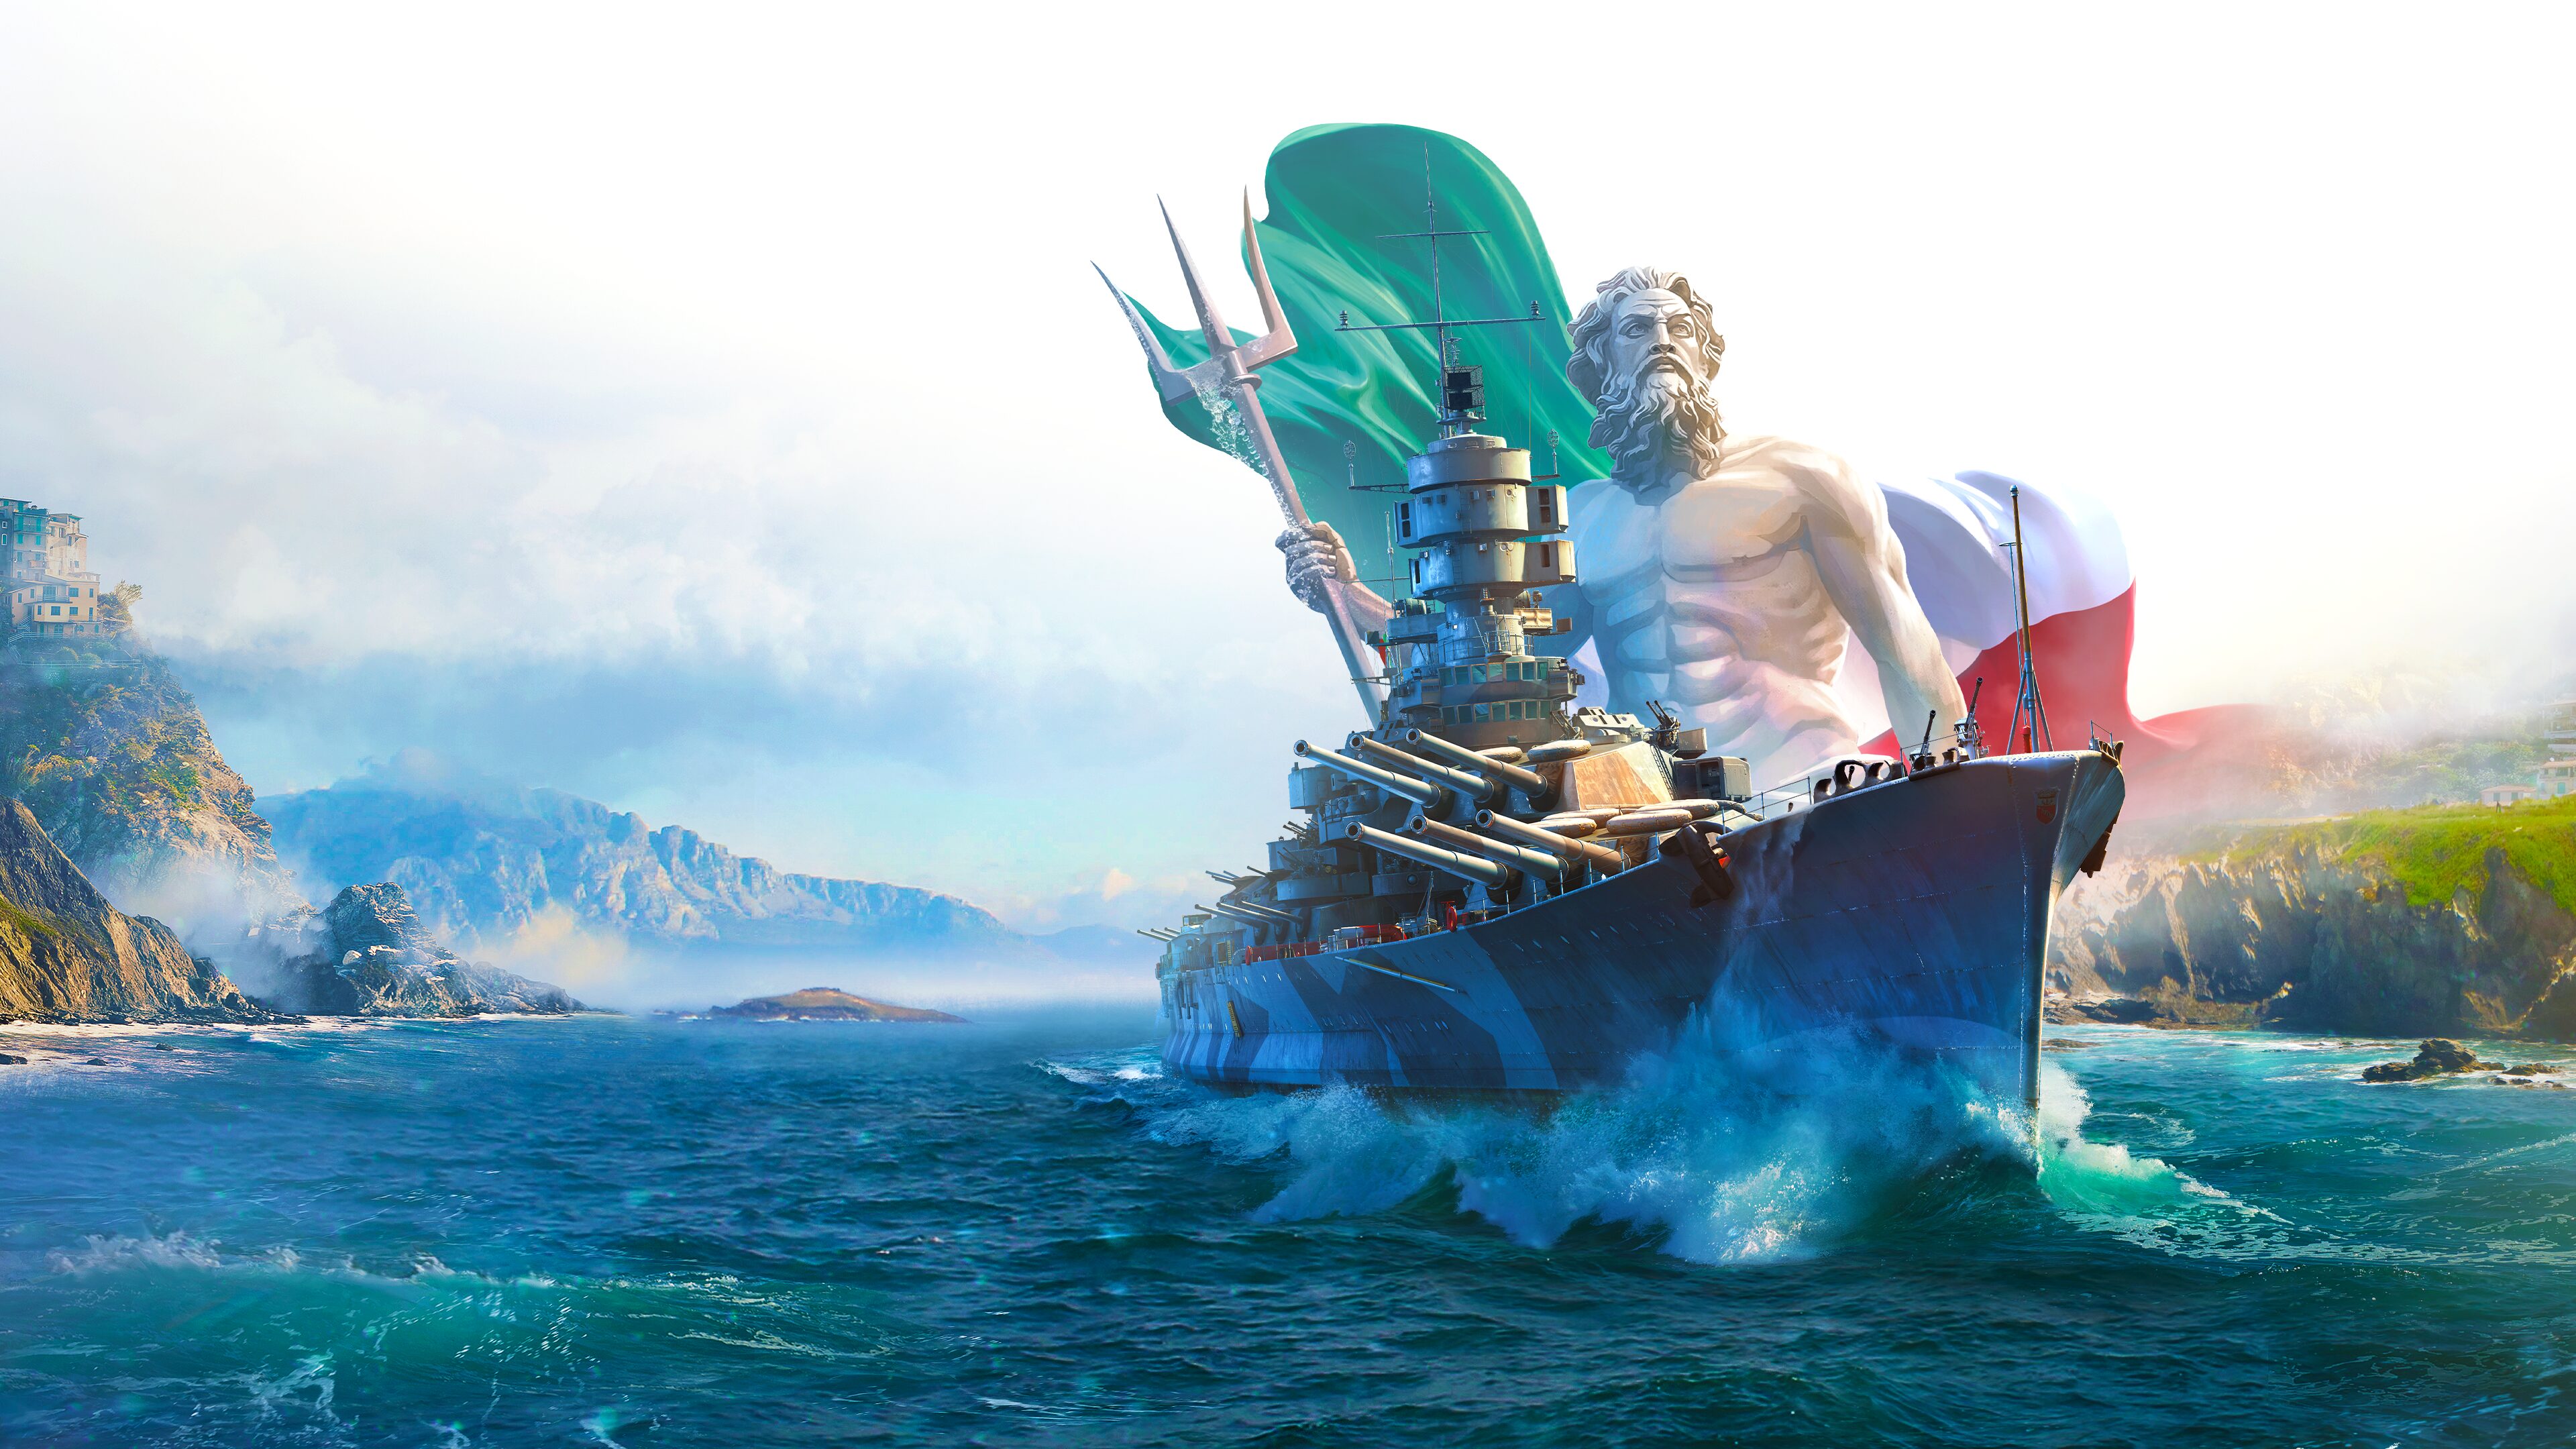 world of warships legends most profitable